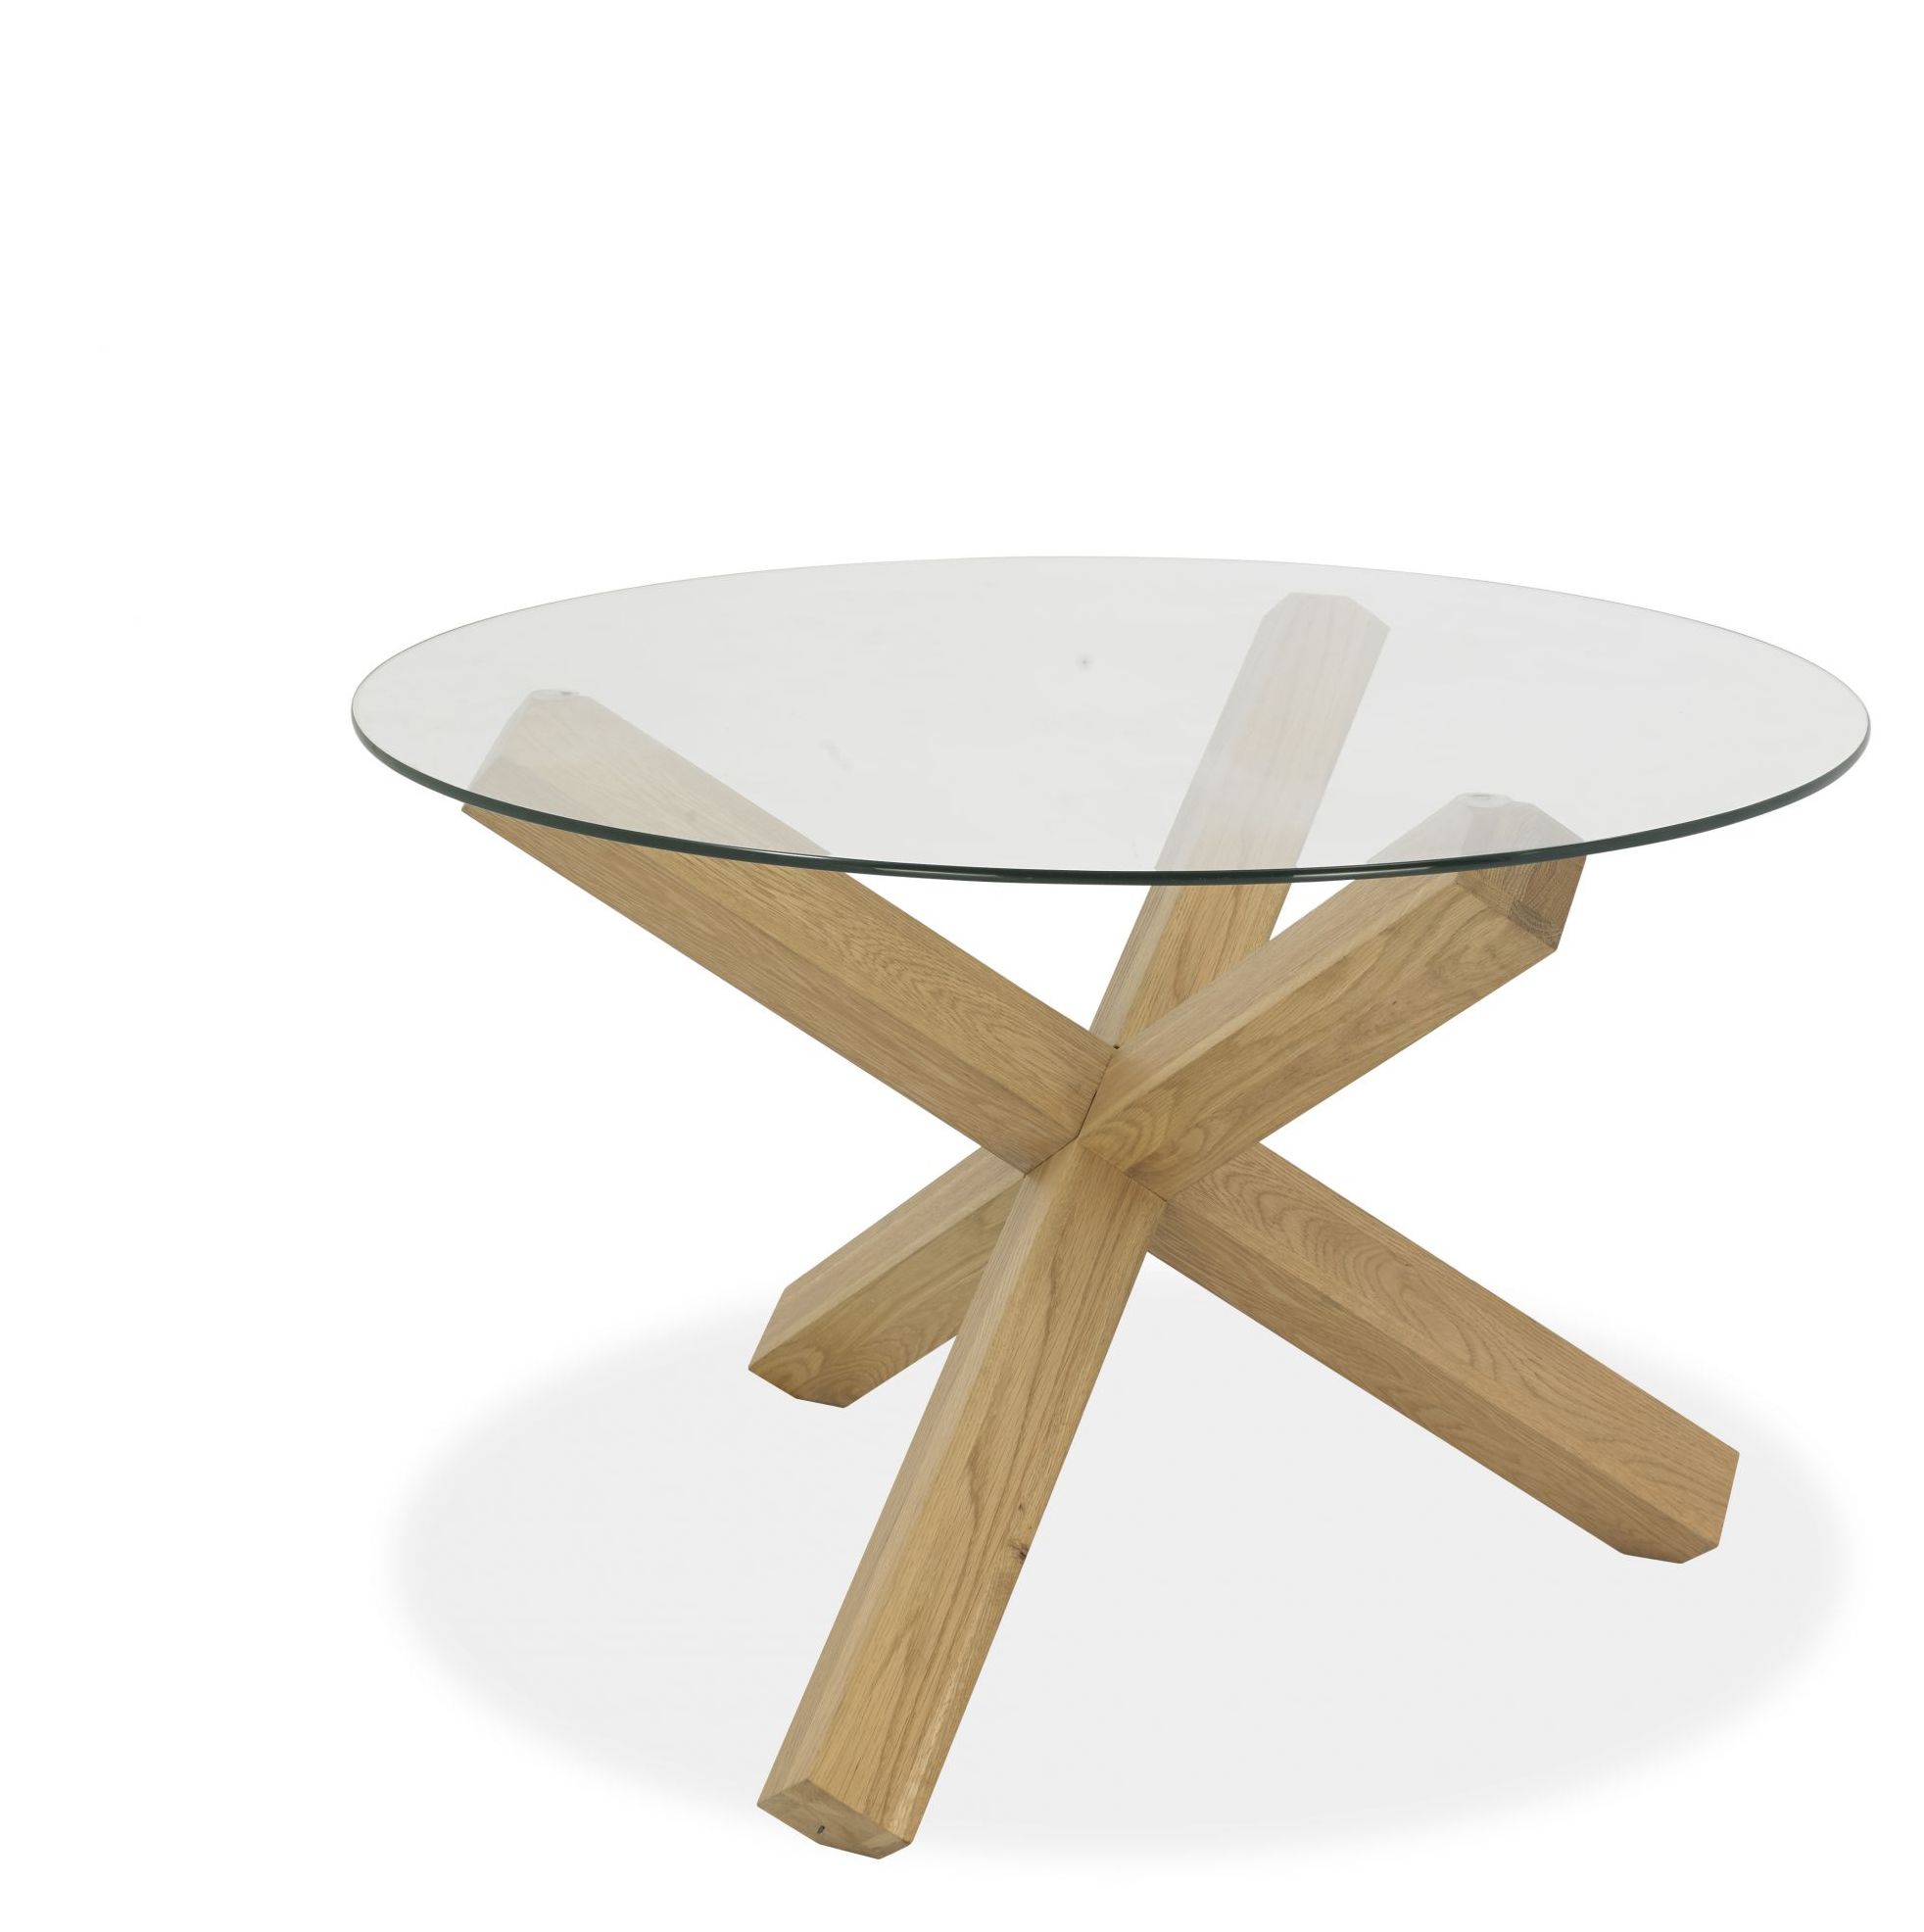 Turin Light Oak Round Glass Top Dining, Light Oak Round Dining Table And Chairs